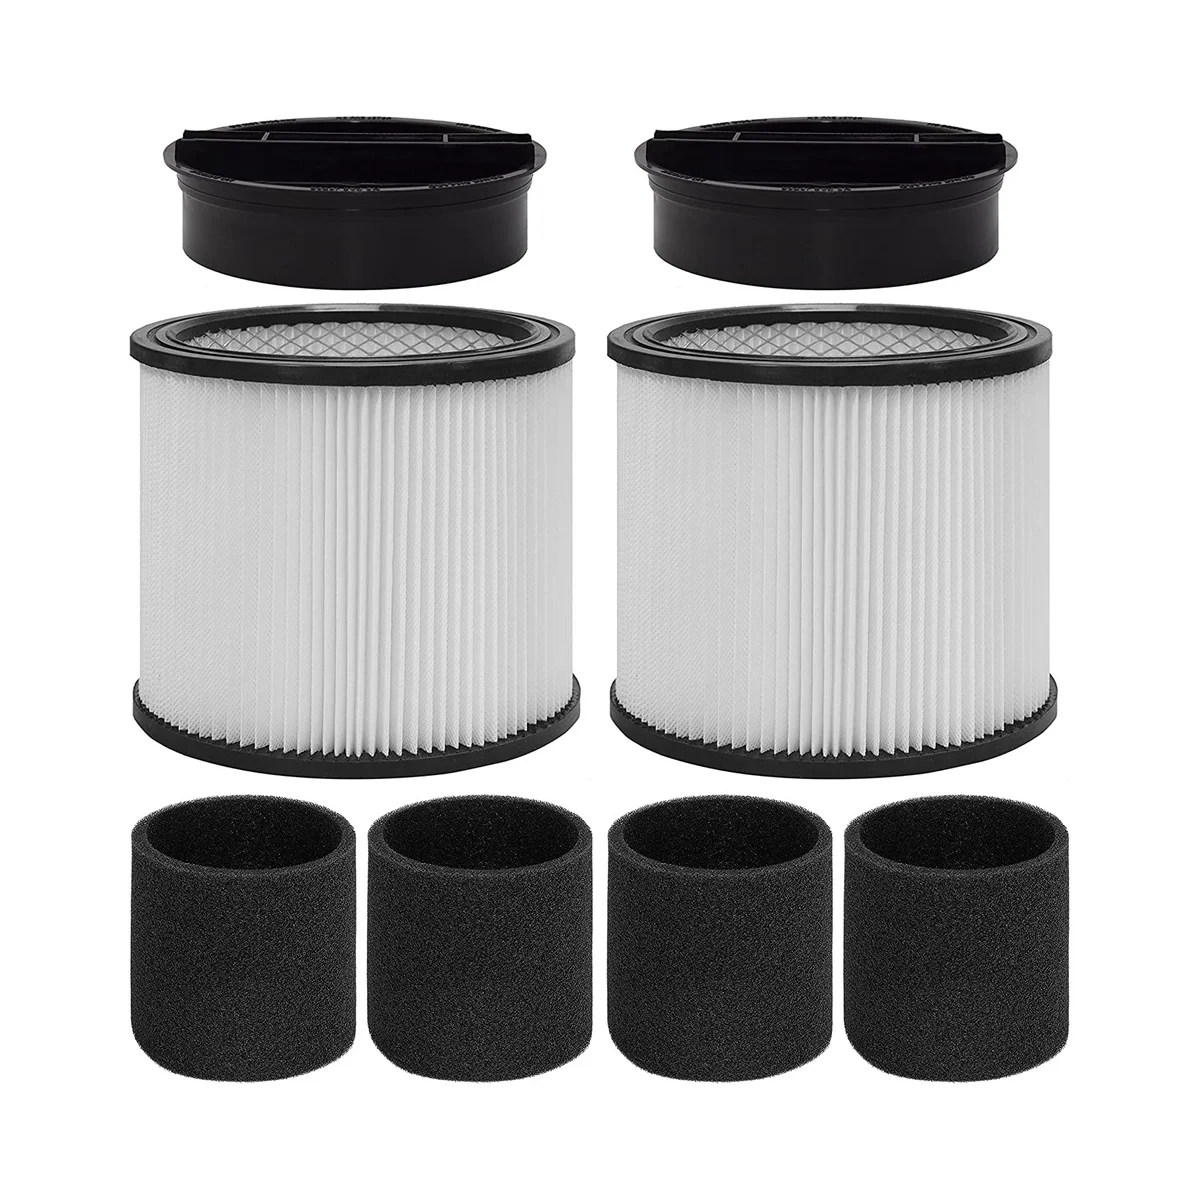 

90304 Replacement Filter with Lid, Compatible for Shop-Vac 90304, 90350, 90333,5 Gallon Up Wet/Dry Vacuum Cleaners